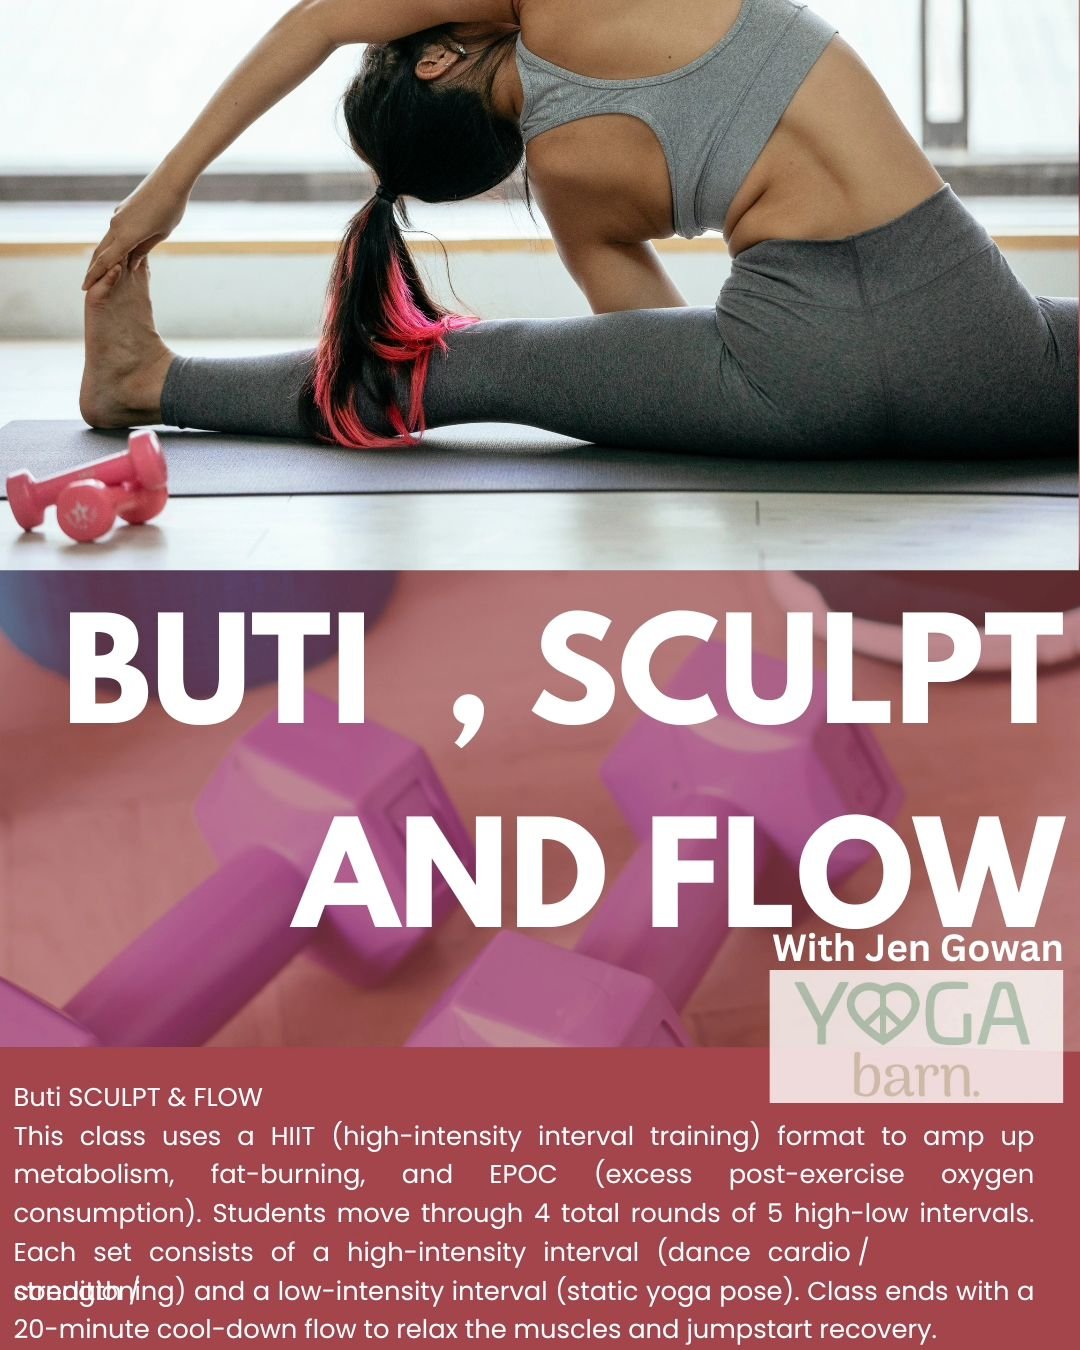 Announcing 📢📢📢📢

Our newest class 🙌 🙌 😍 👏 

Buti SCULPT &amp; FLOW

With @jaygow Jen Gowan!!

This class uses a HIIT (high-intensity interval training) format to amp up metabolism, fat-burning, and EPOC (excess post-exercise oxygen consumptio